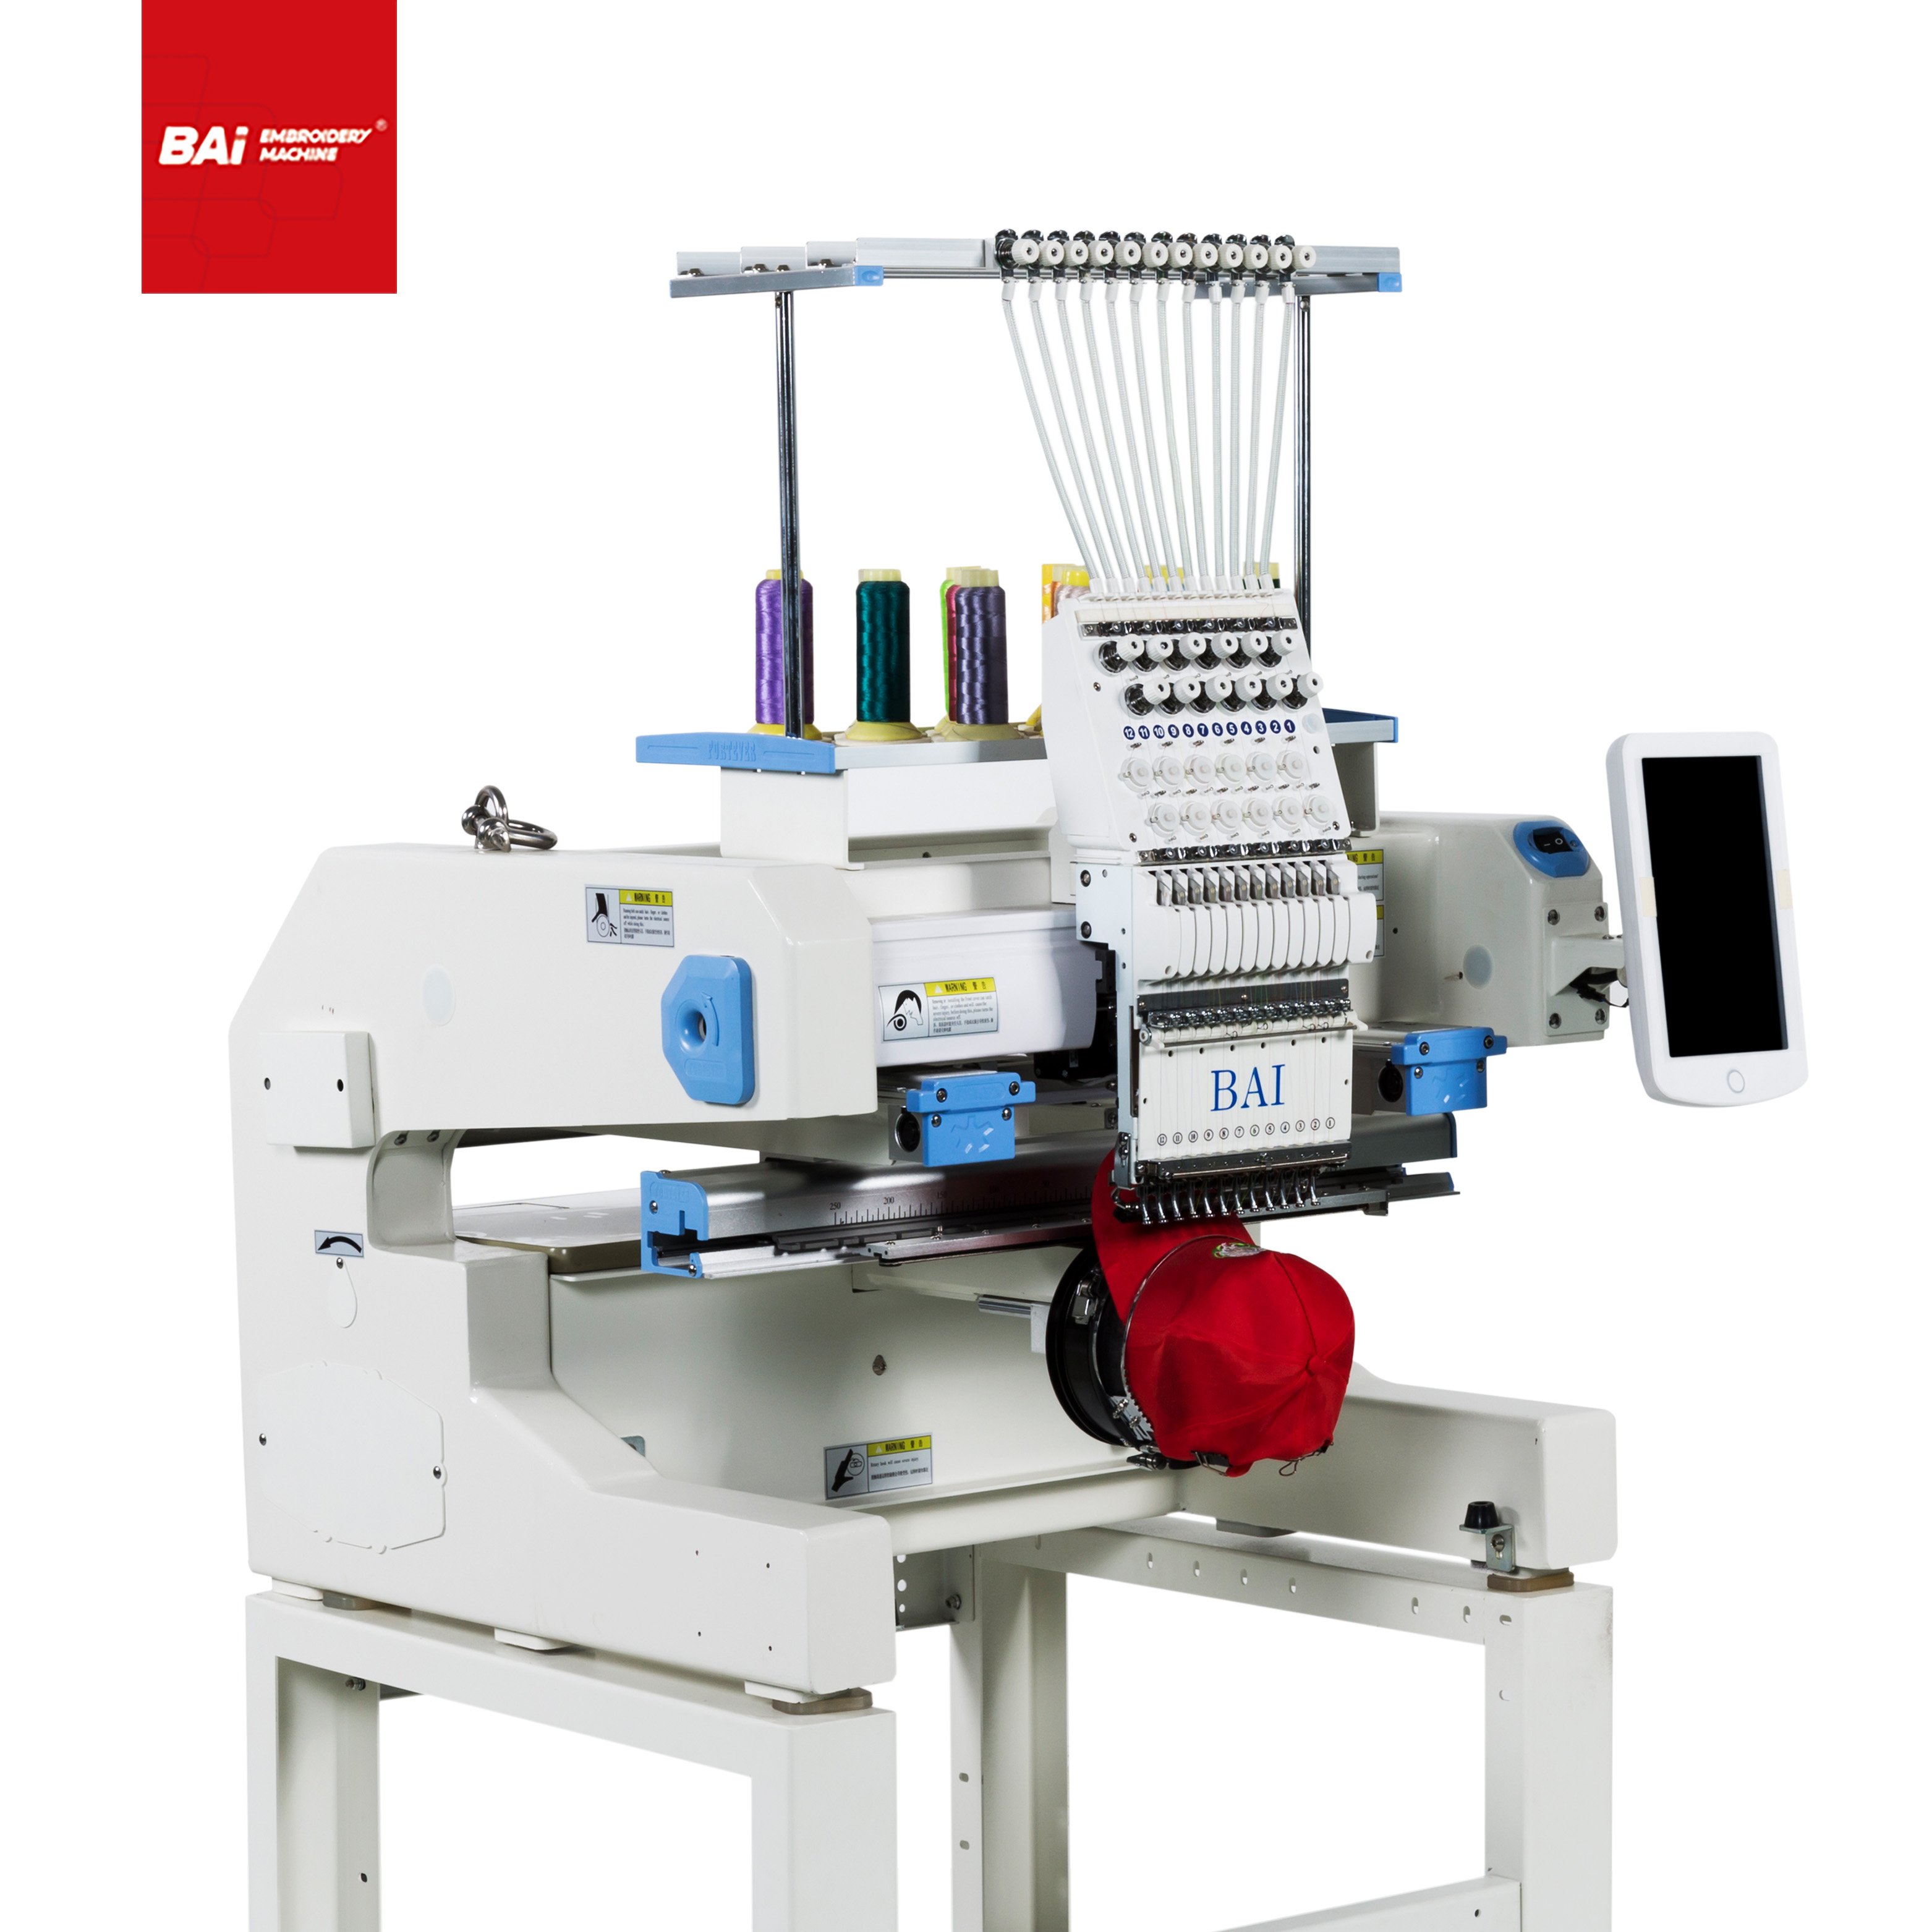 BAI Household T Shirt Embroidery Machine for High Speed with Tshirt/cap